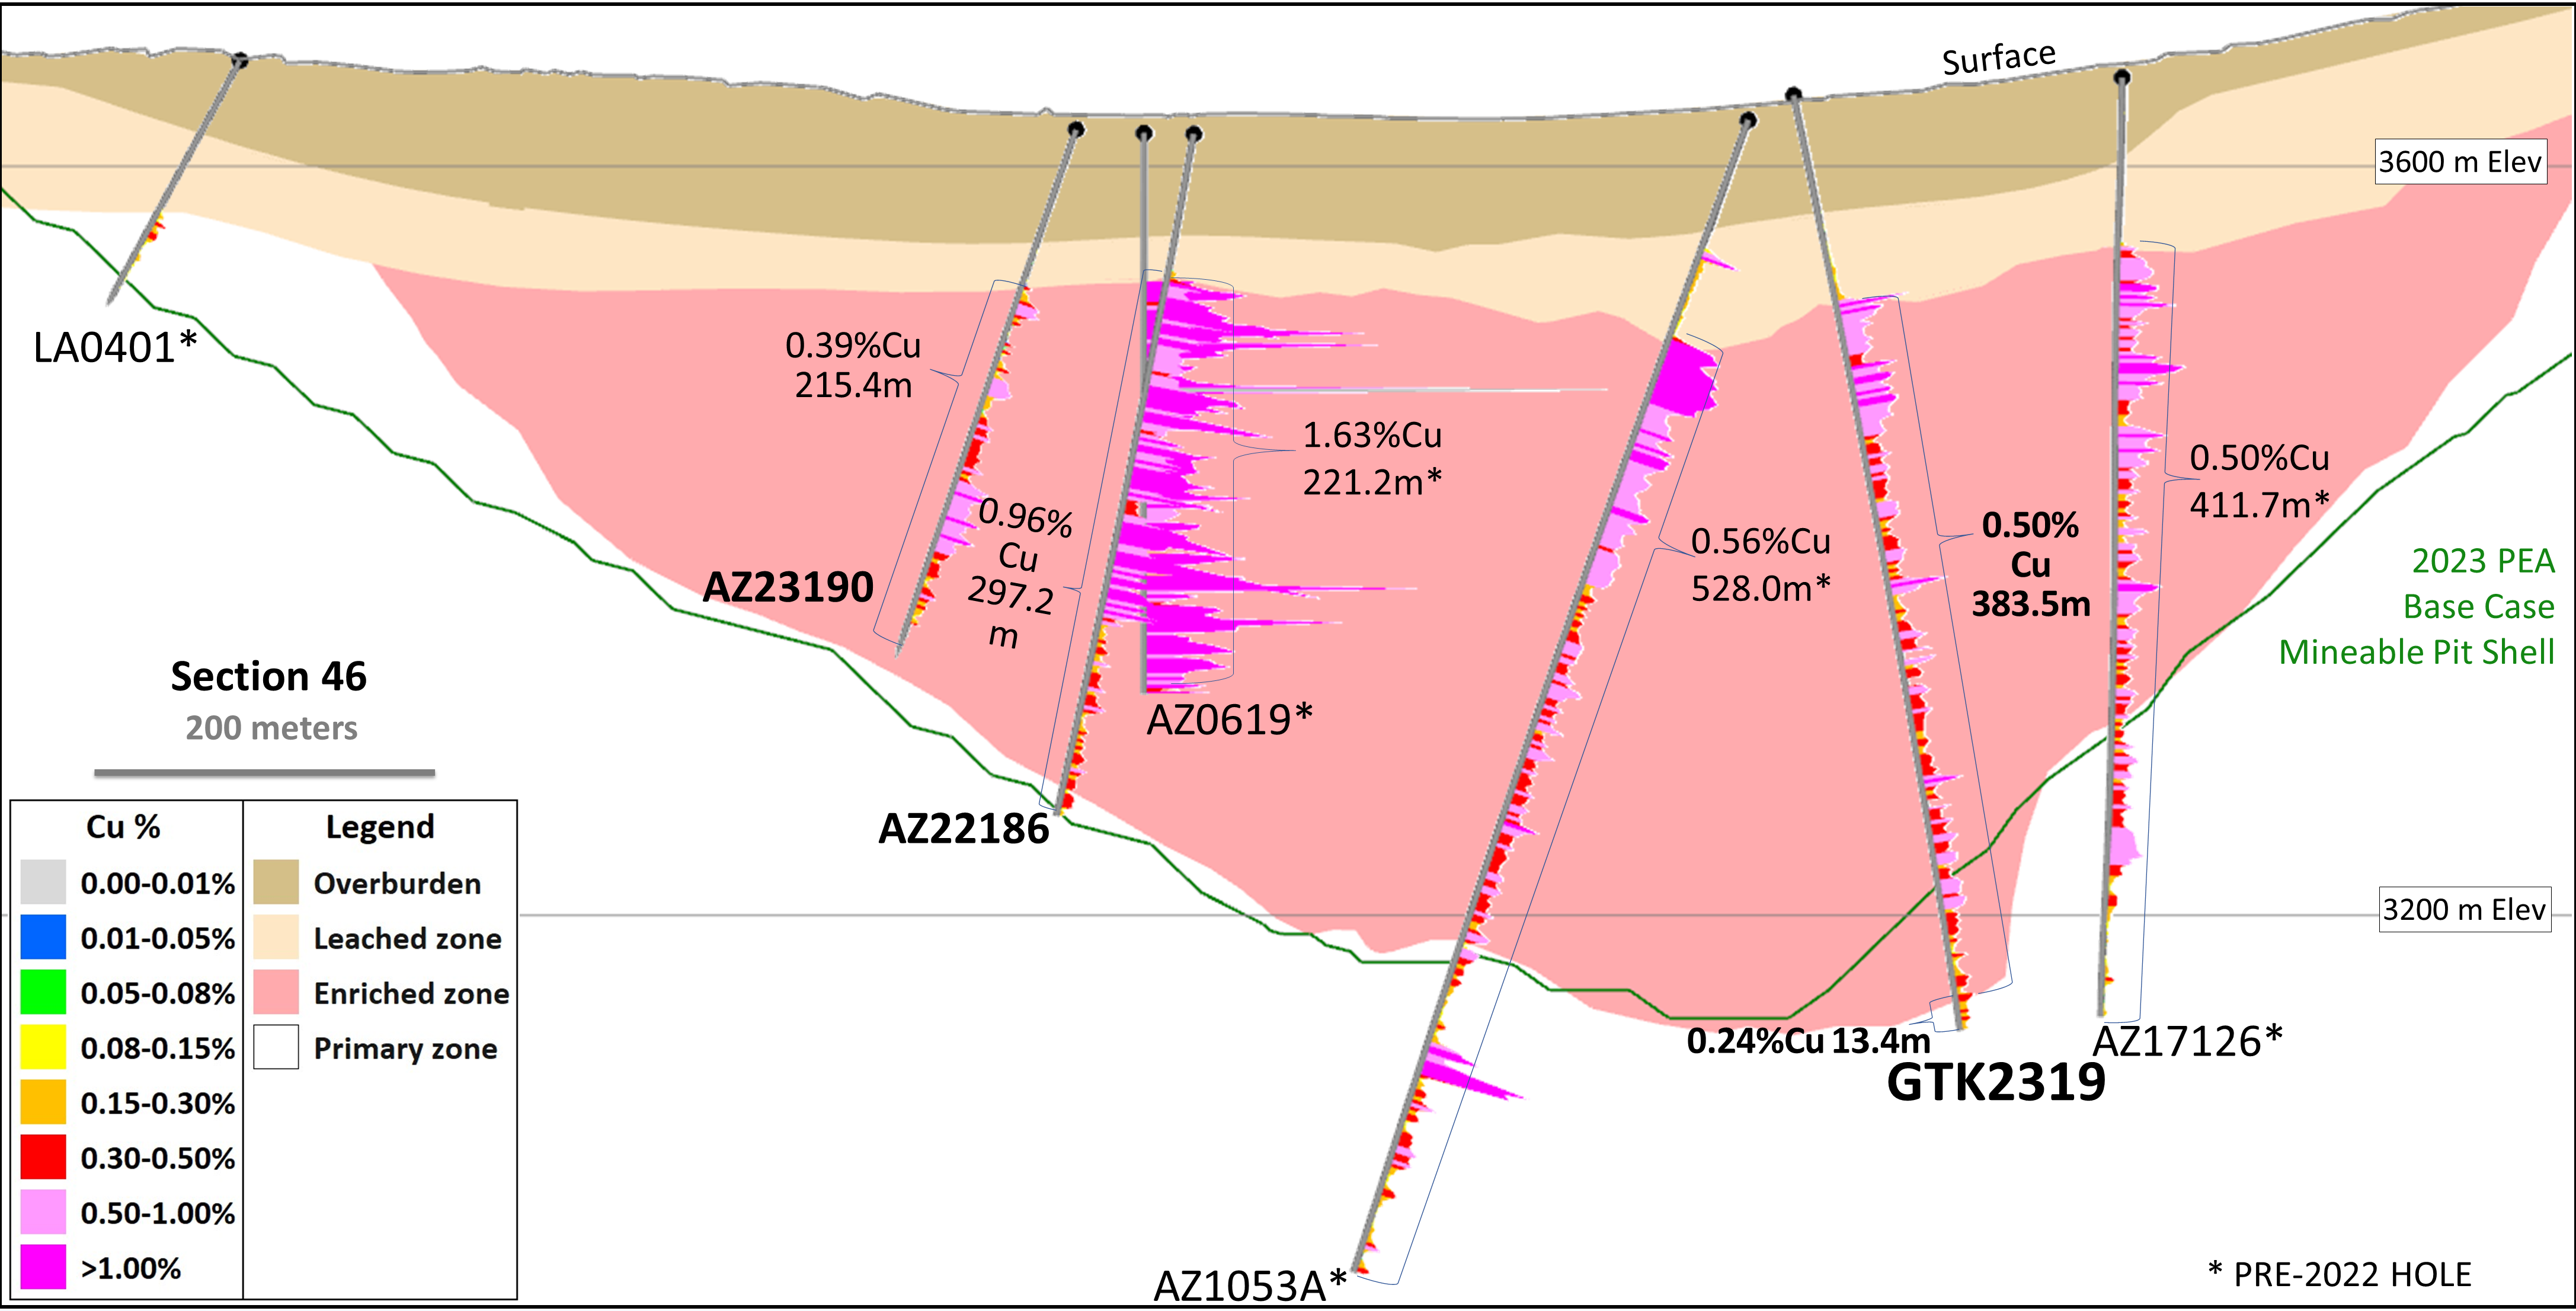 Figure 3 - Section 46 - Drilling, Mineral Zones & 2023 Base Case Mineable Resource Pit (Looking North)